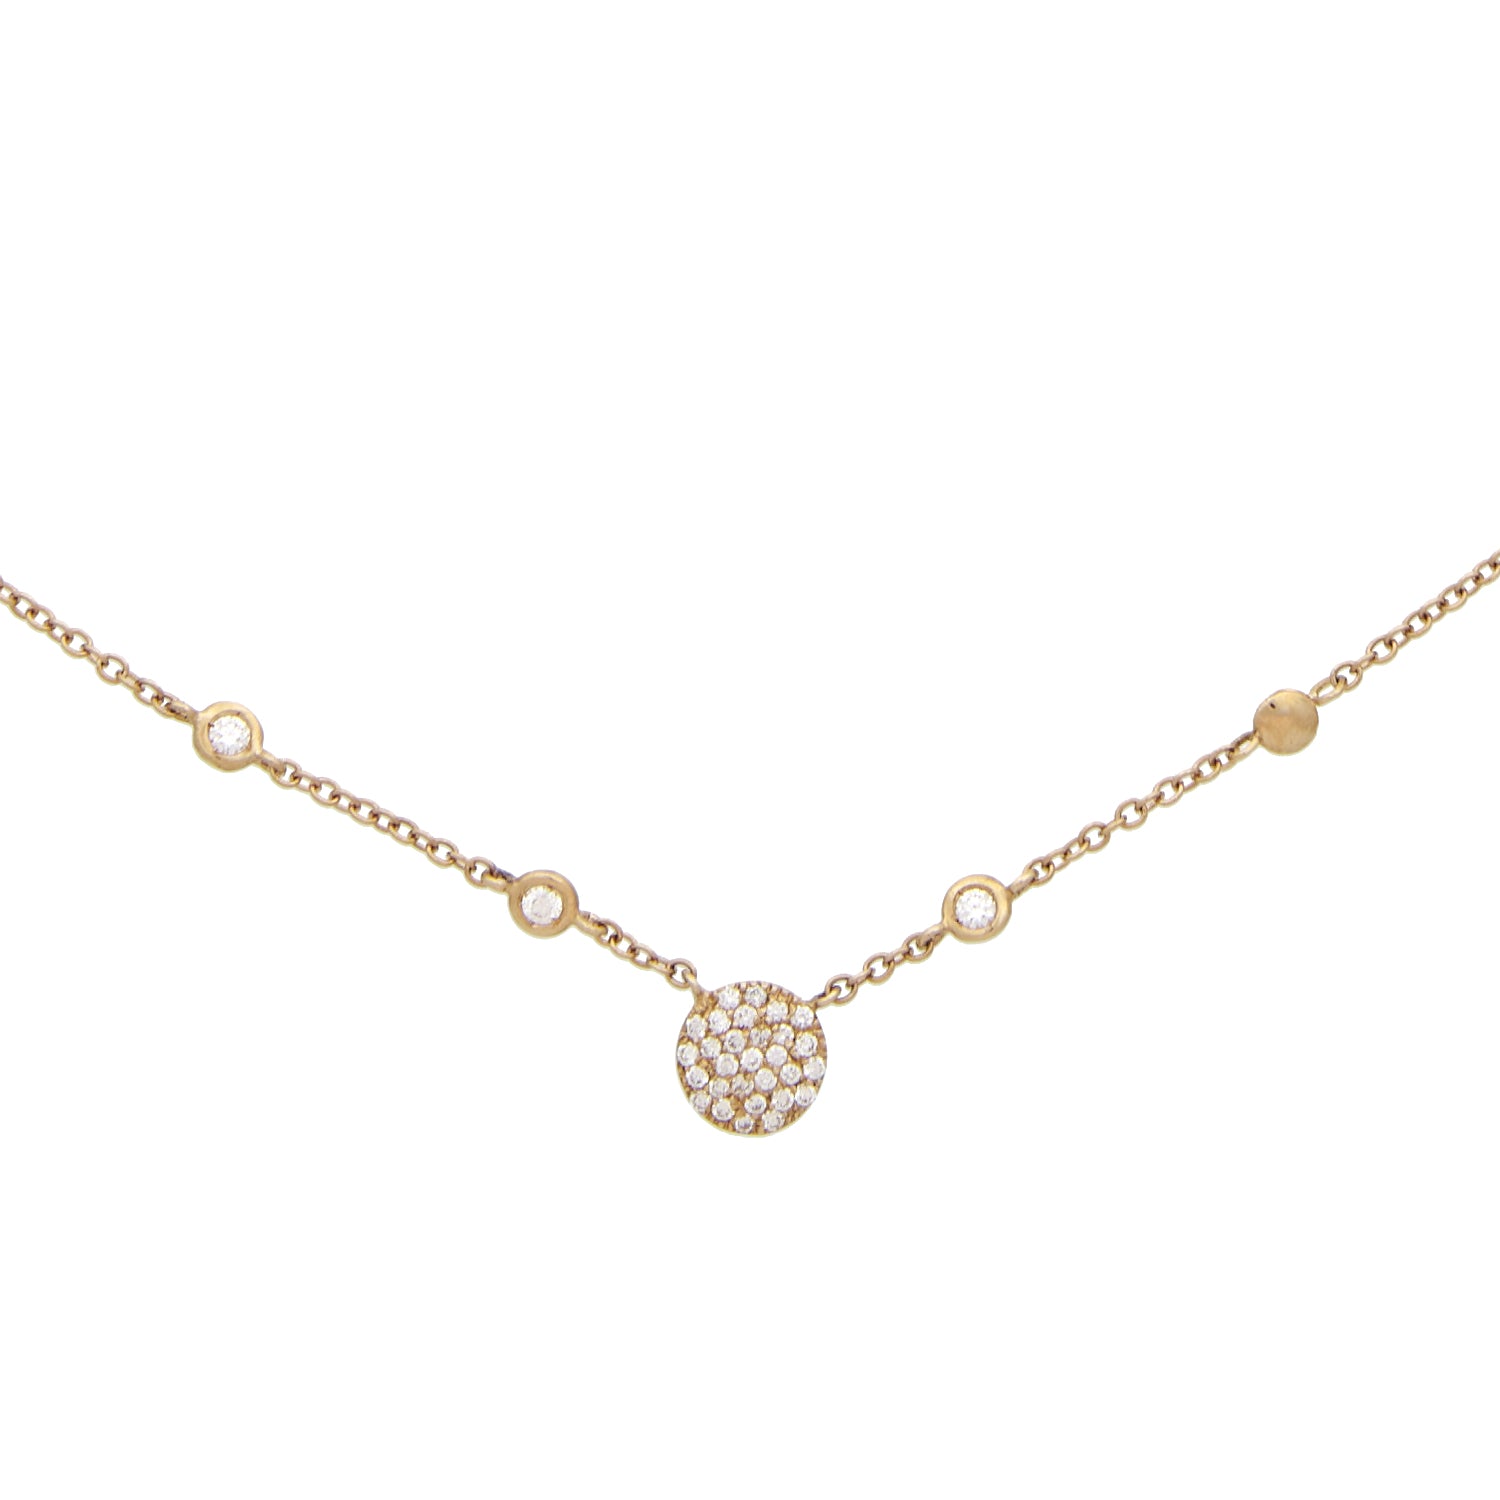 Rose gold necklace with diamond